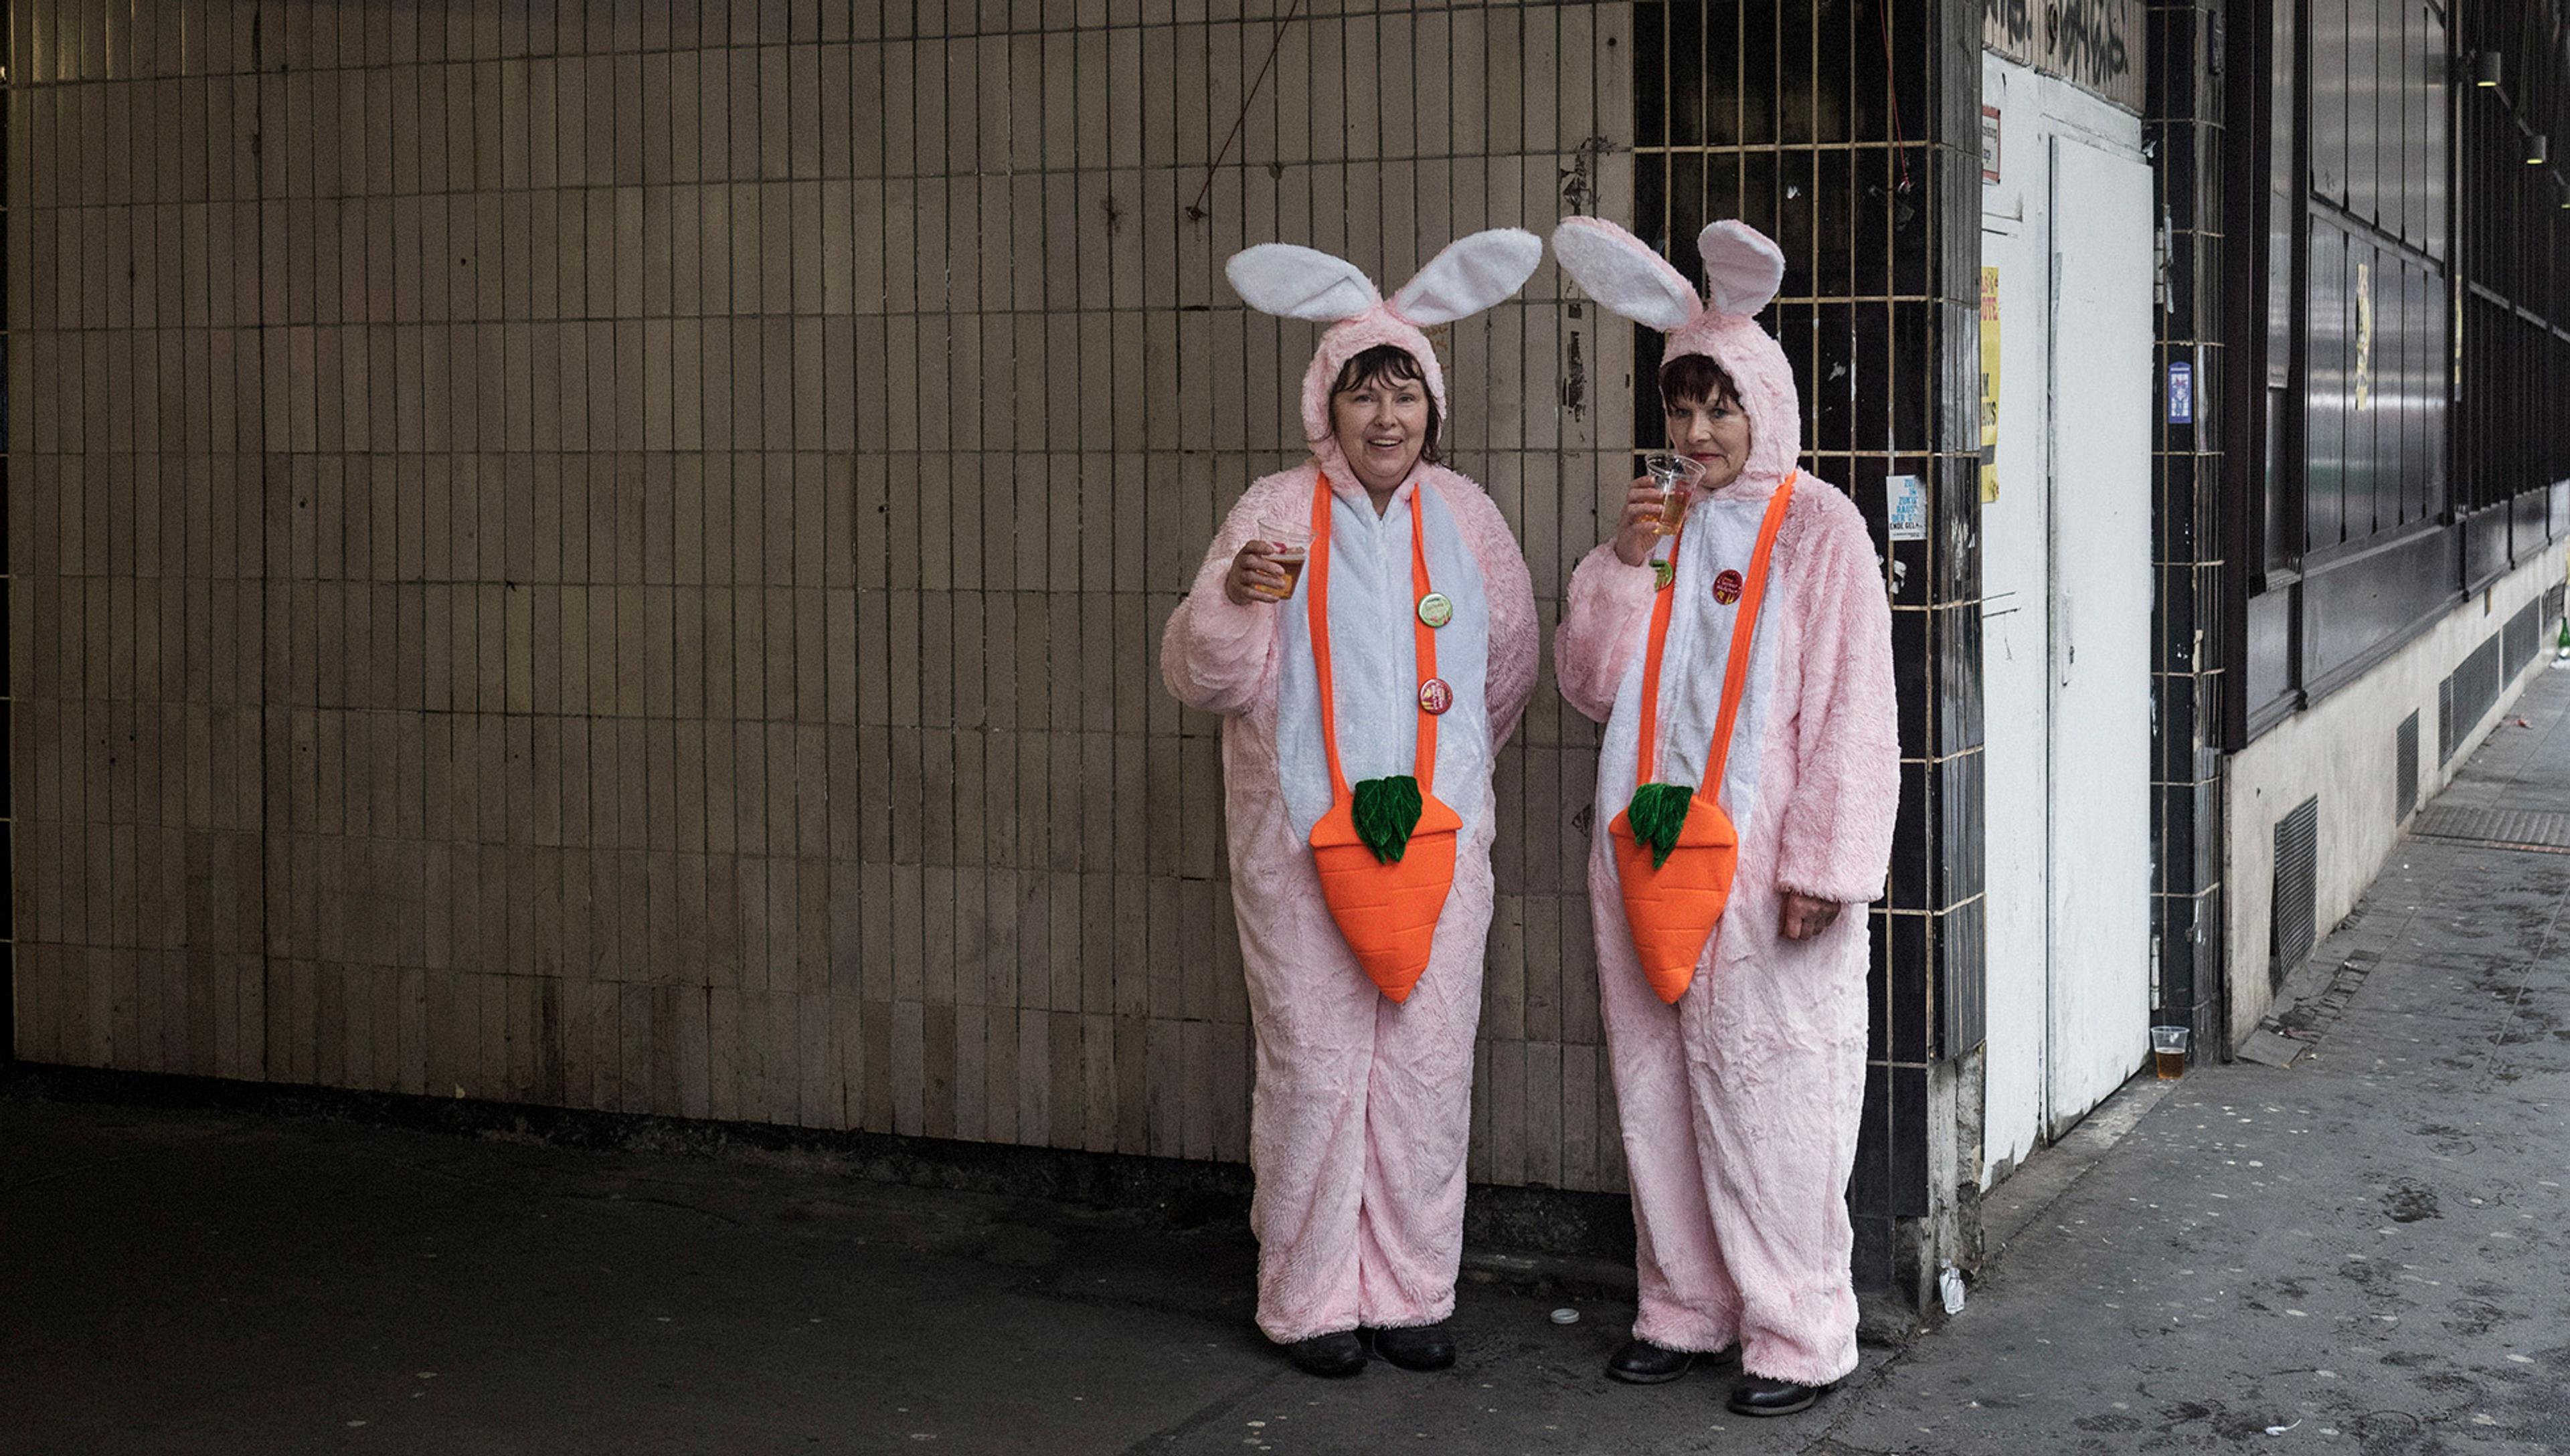 Two women dressed in pink and white rabbit outifts drink a beer outside a subway station entrance. One of them looks glum